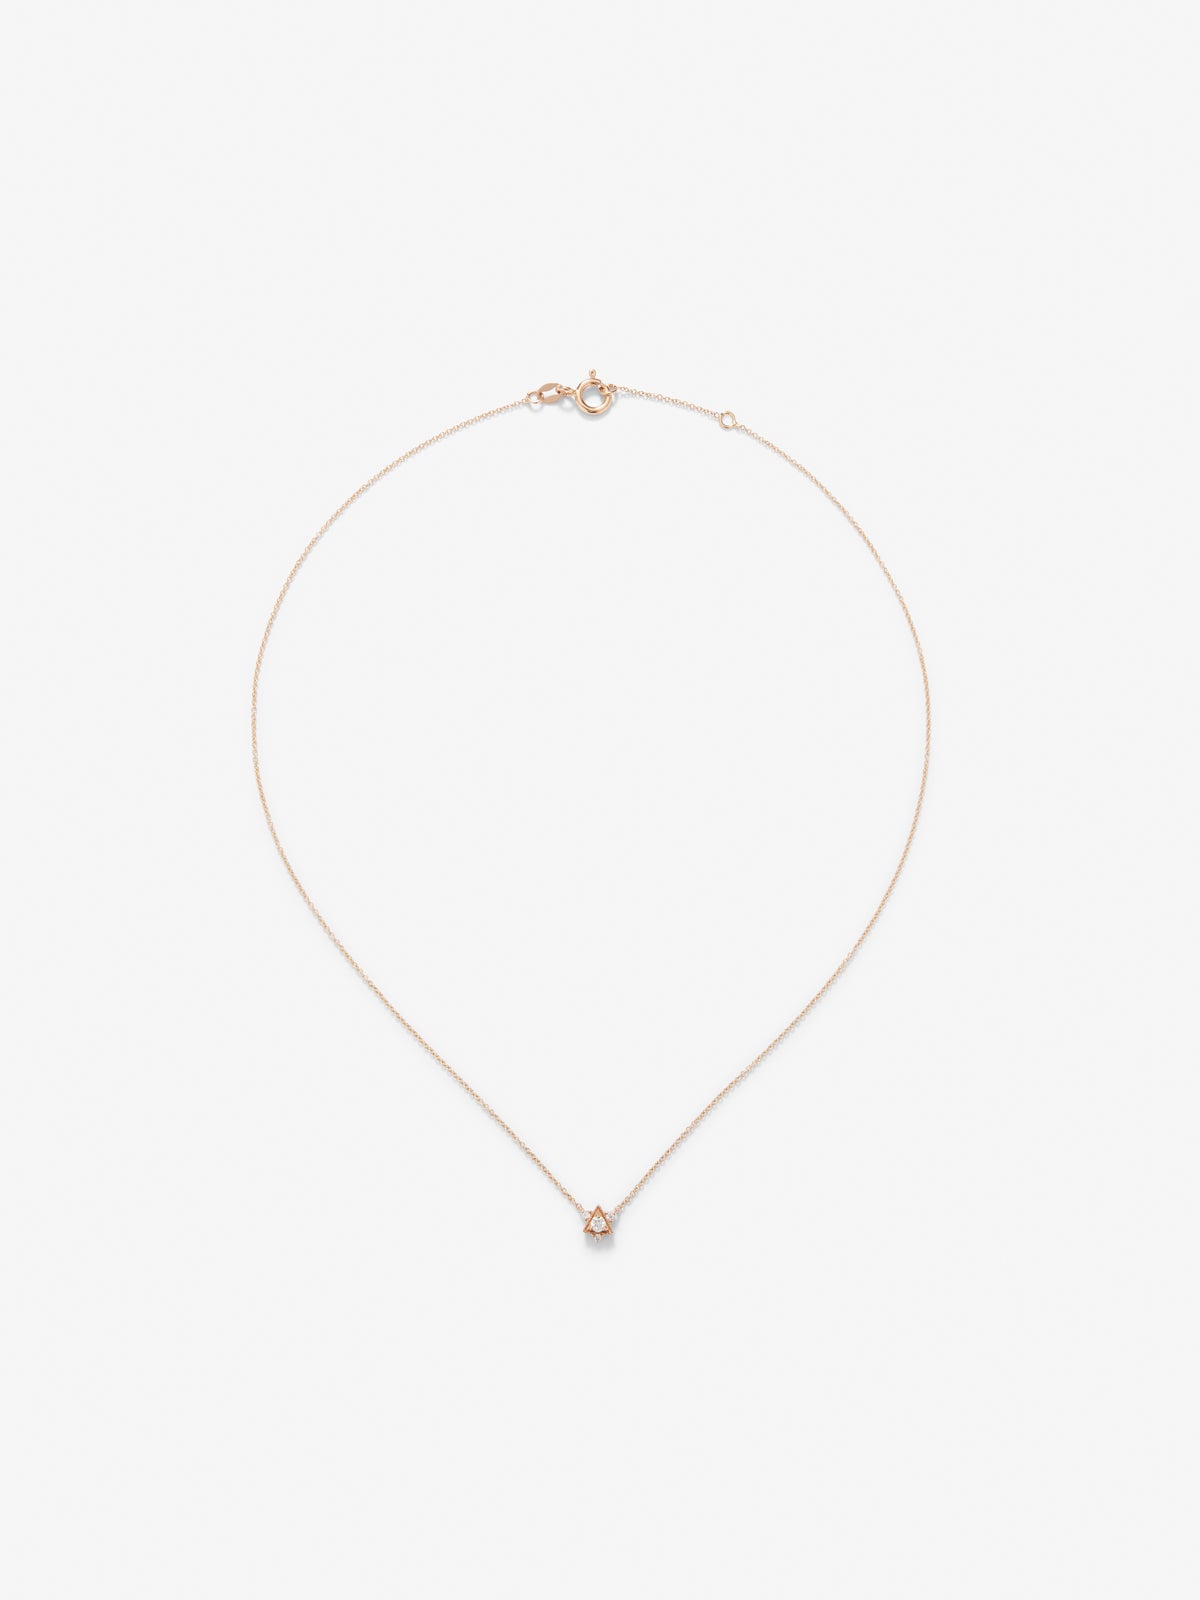 18K rose gold necklace with 4 brilliant-cut diamonds with a total of 0.1 cts